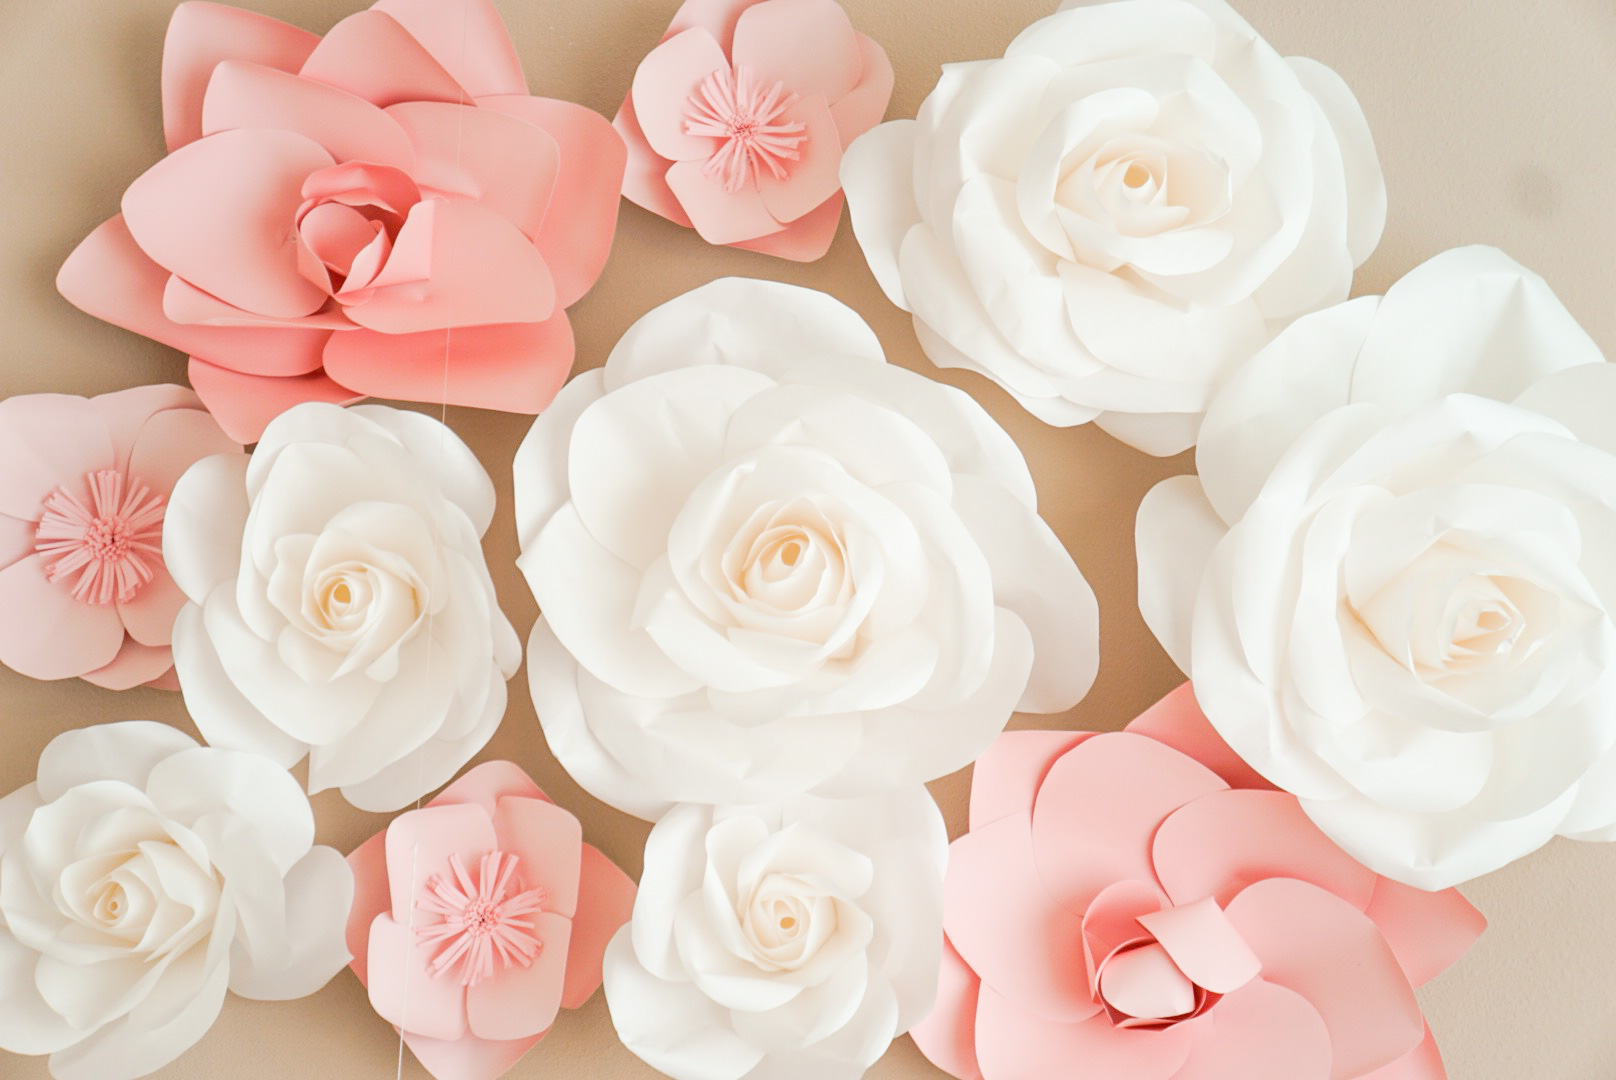 Lifestyle Blogger Katelyn Jones of A Touch of Pink shares her Baby Girl's Nursery and Paper Flowers above the crib